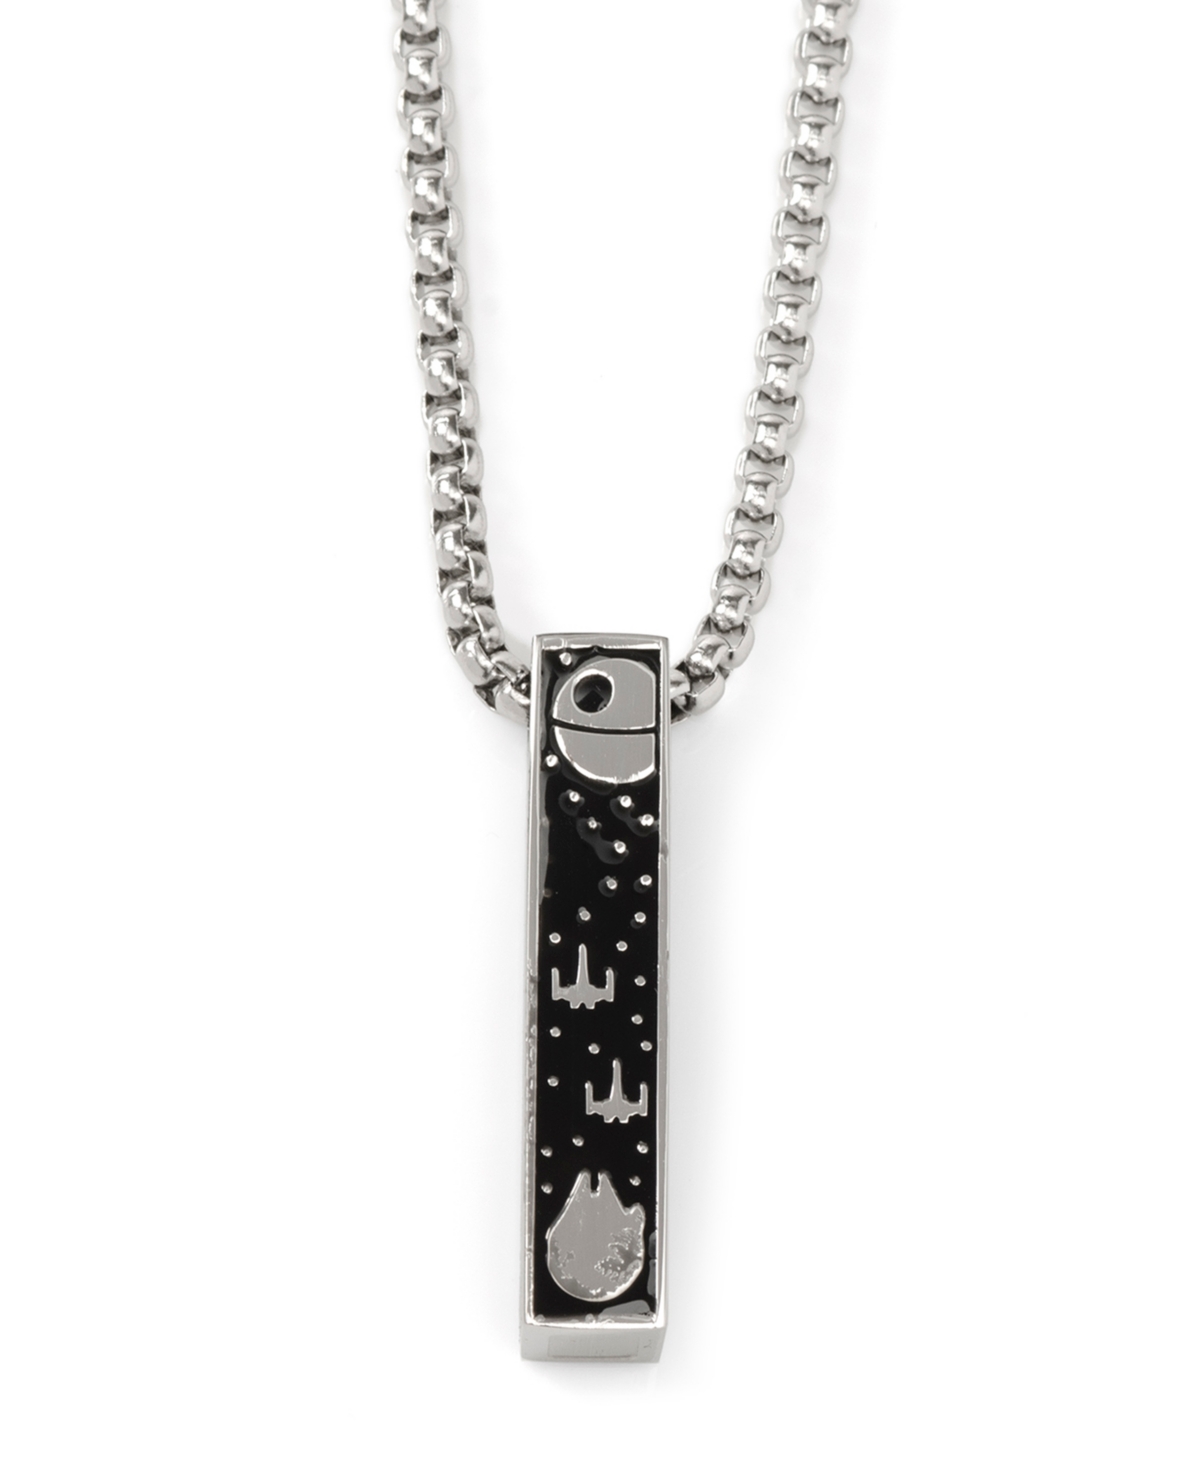 Men's Star Wars A New Hope Necklace - Silver